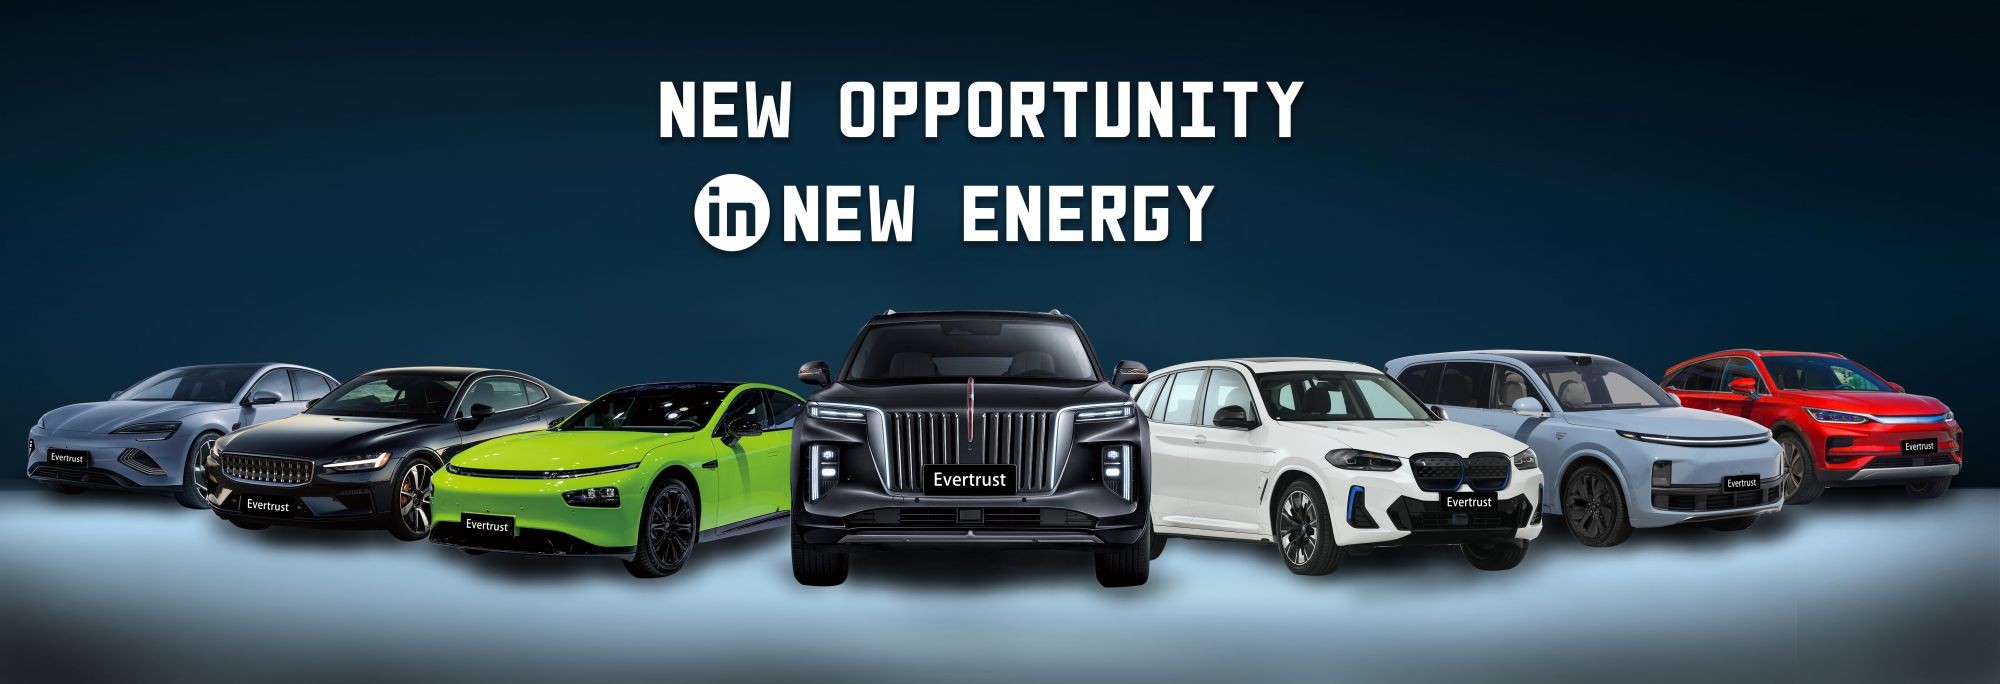 New Opportunity in New Energy